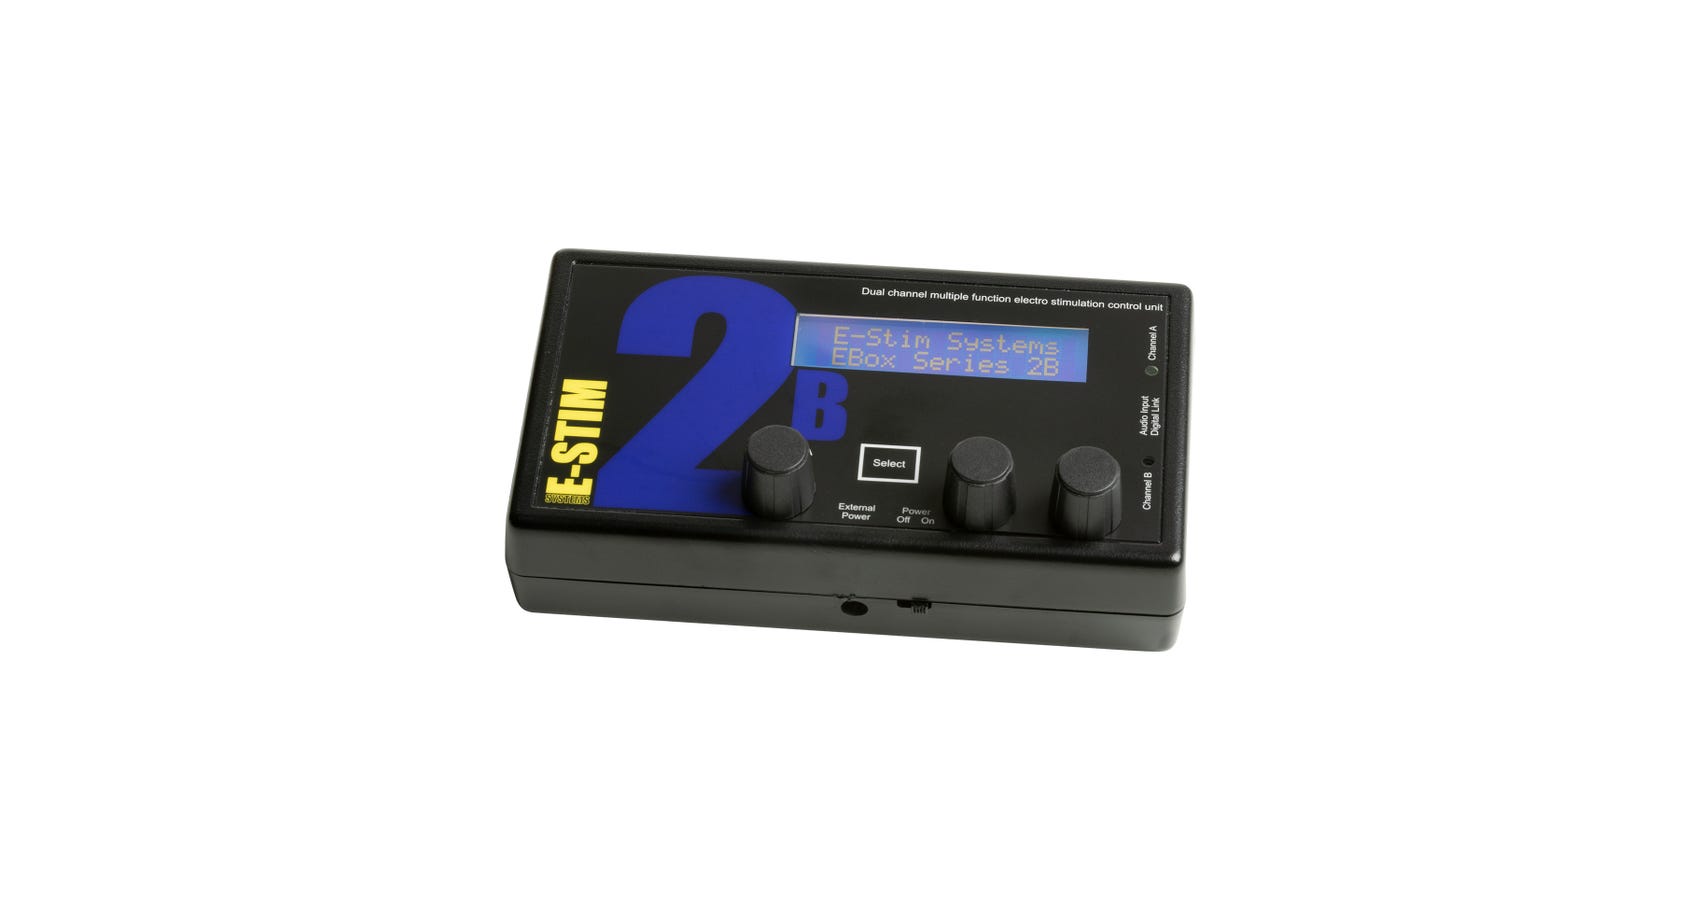 Series 2B  The Ultimate in E-Stim Control and Power